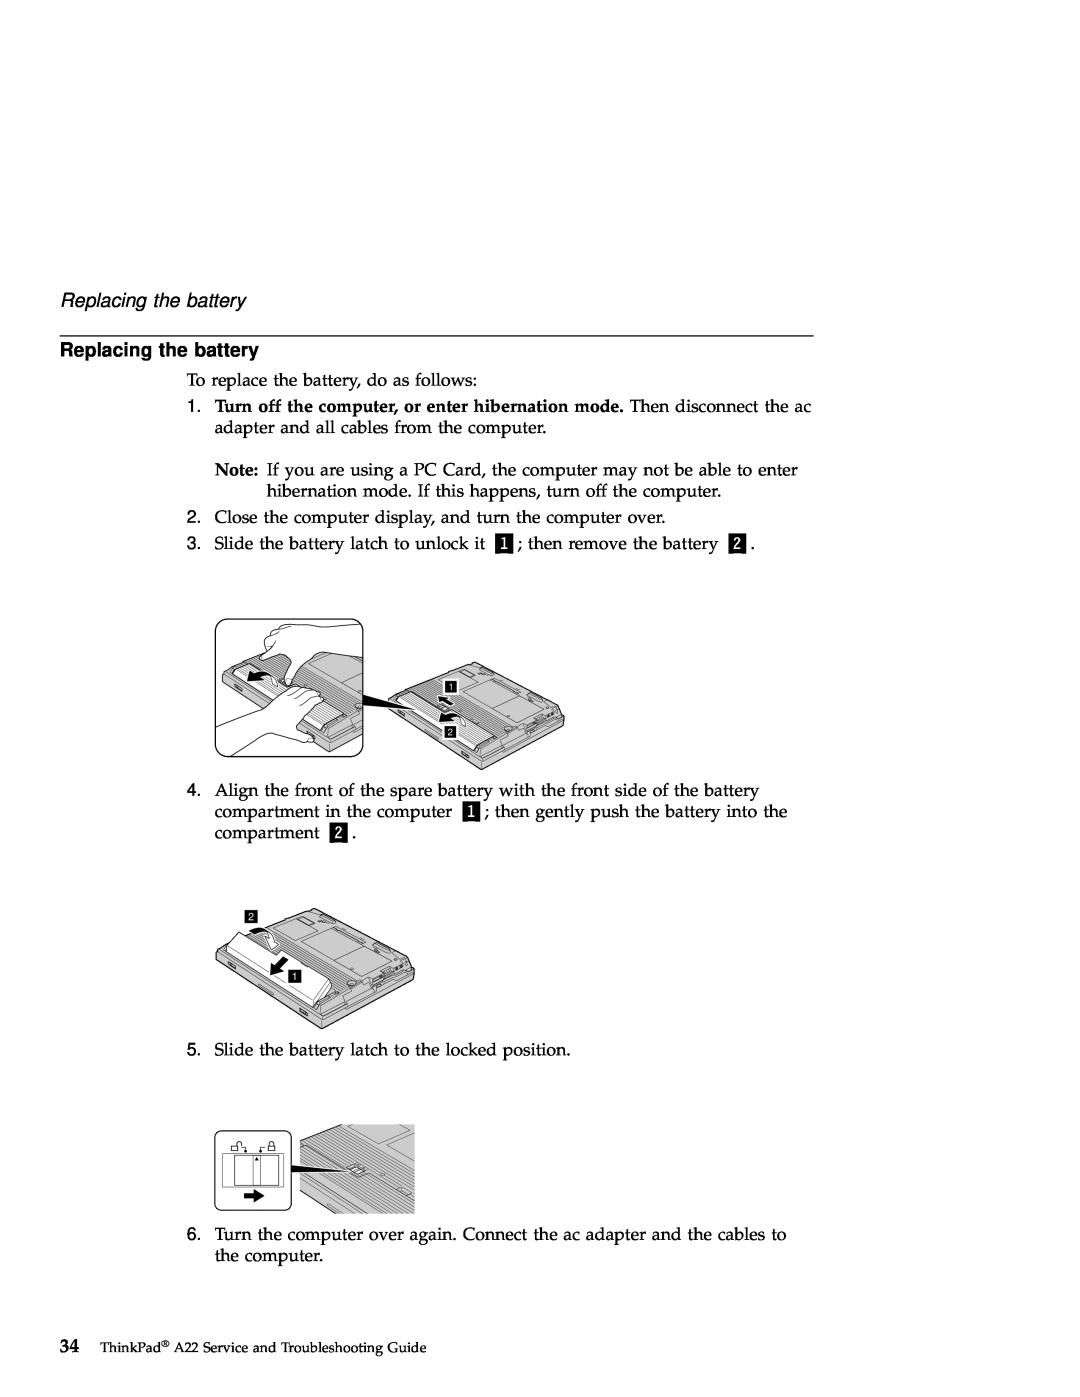 IBM A22 manual Replacing the battery 